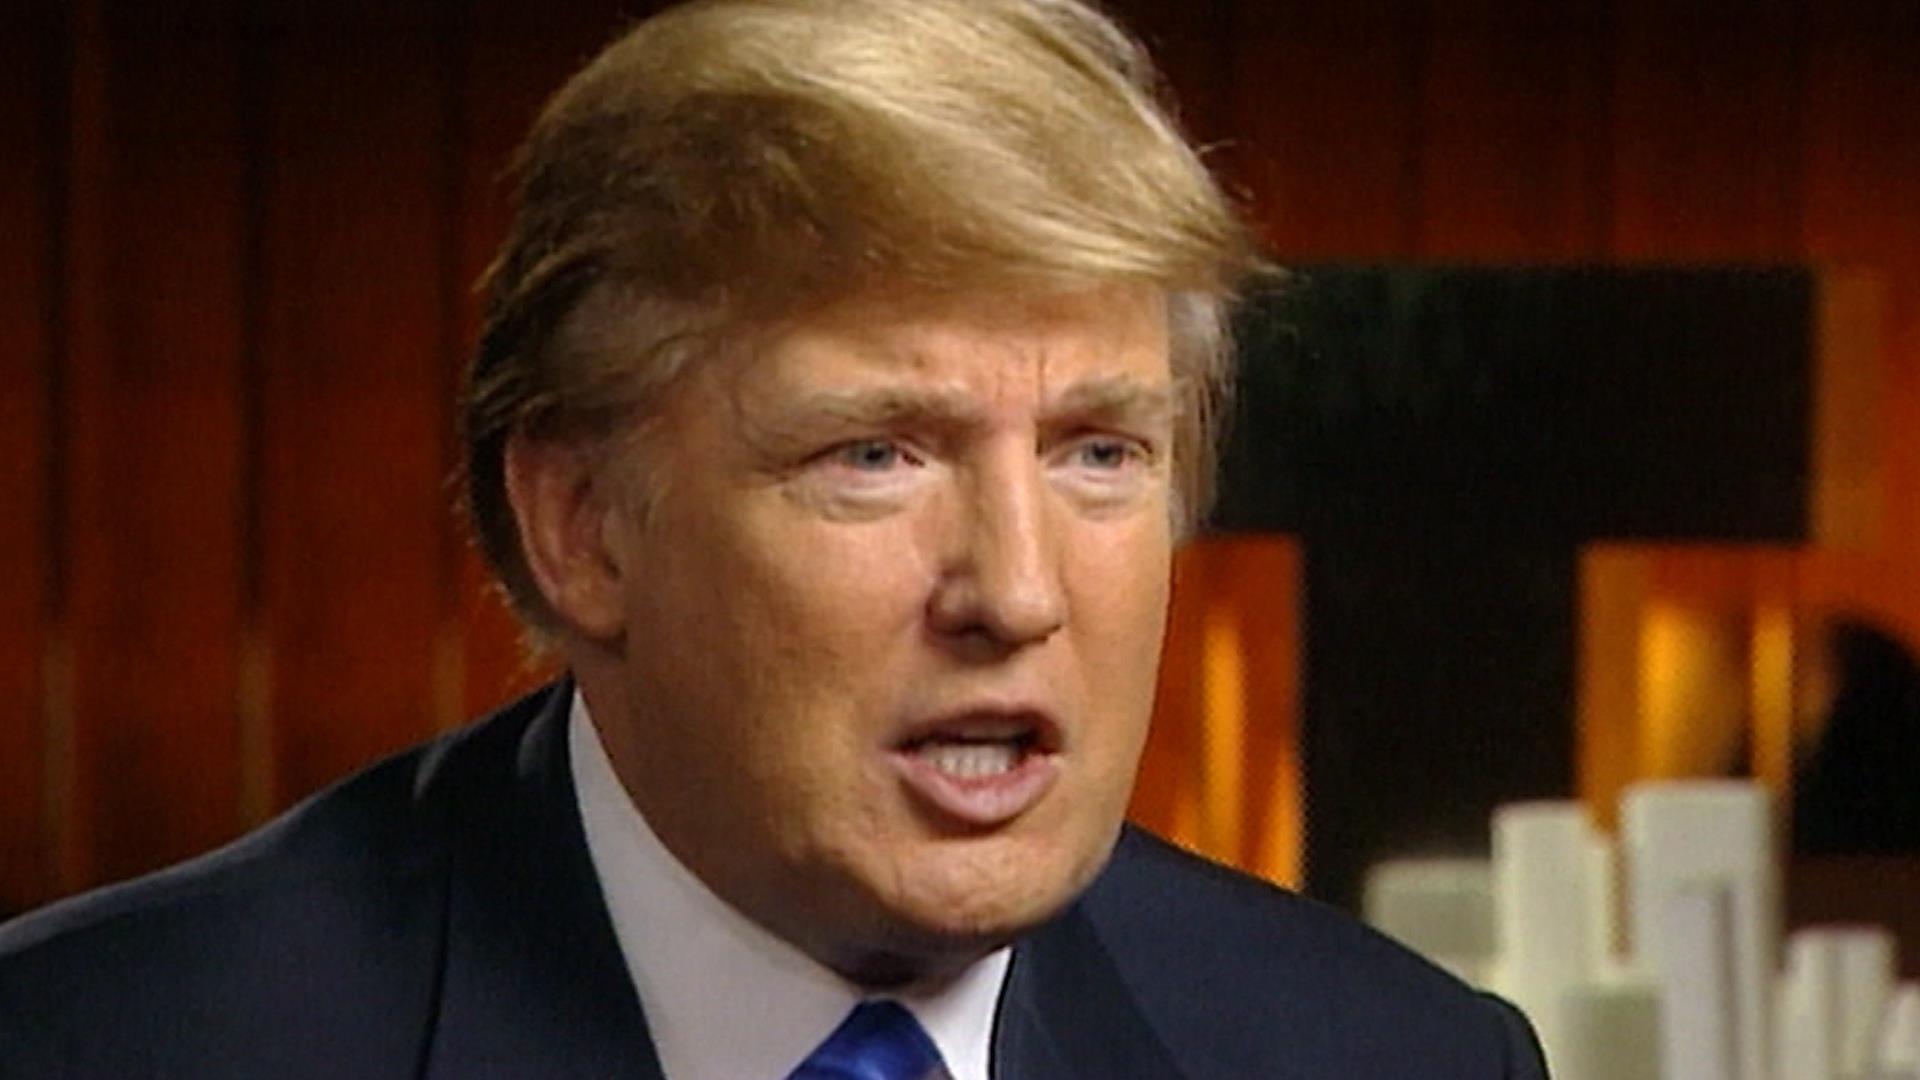 2004: Trump Says Pregnancy Can Be An Inconvenience'